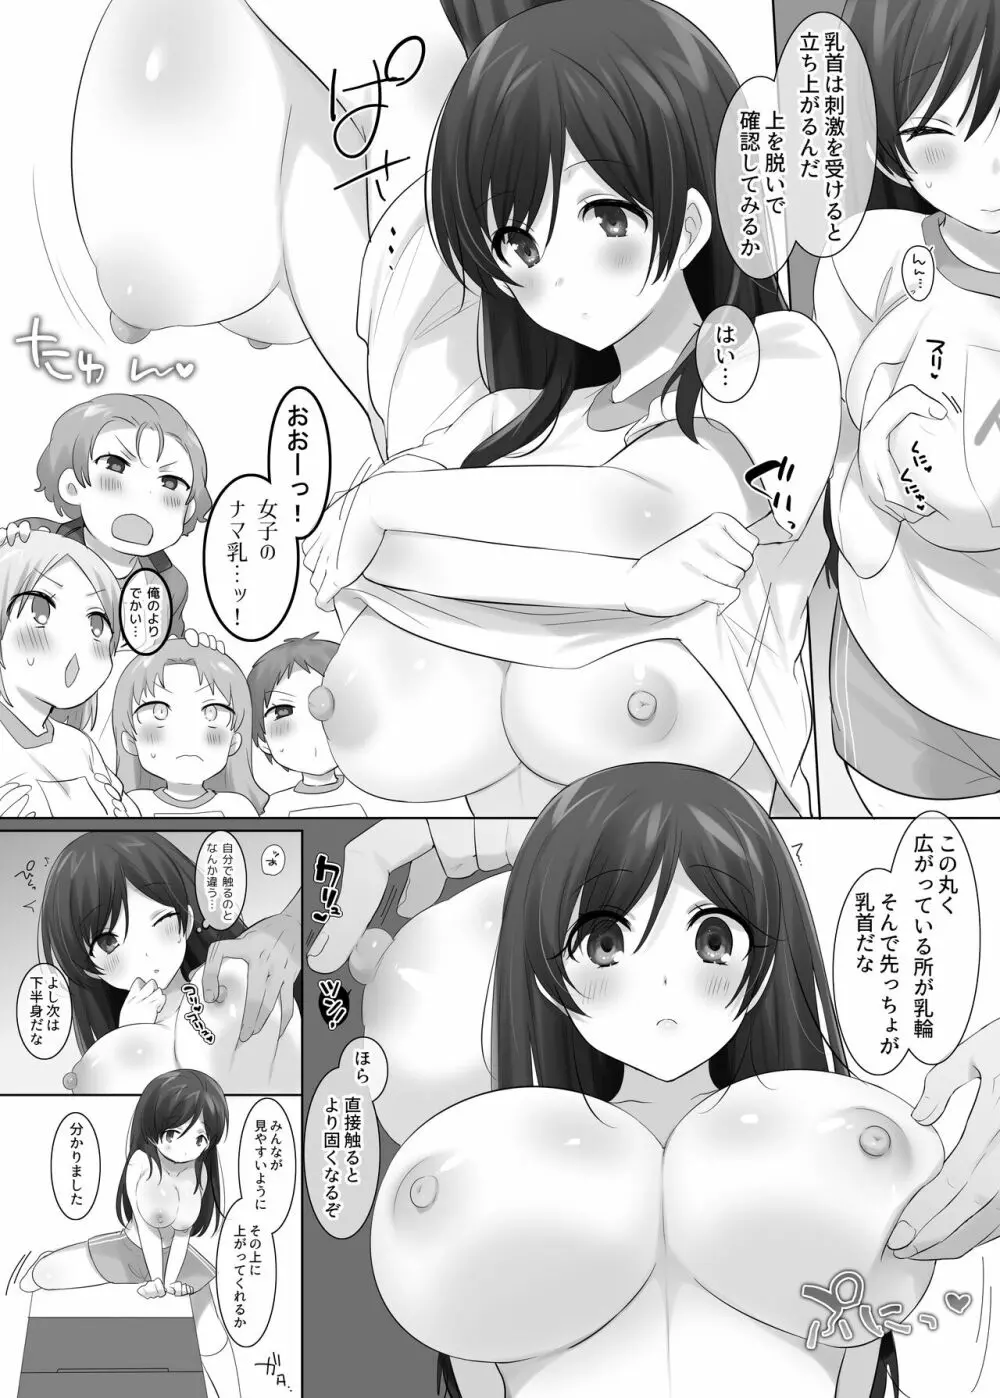 TS保健体育～クラス全員女体化授業～/佐藤くん編まとめ Page.9